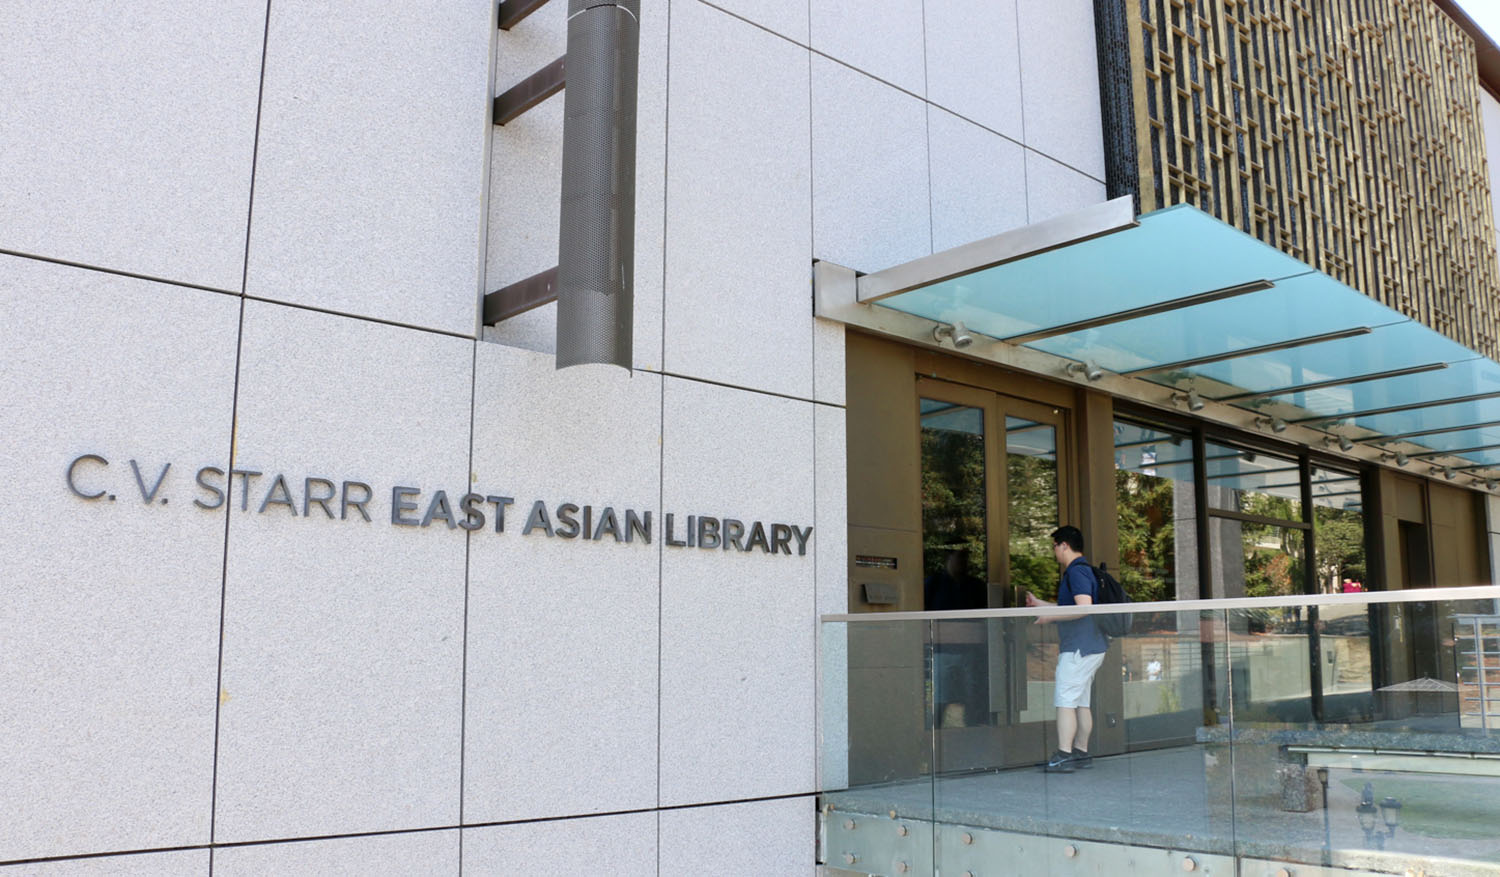 East Asian Library exterior